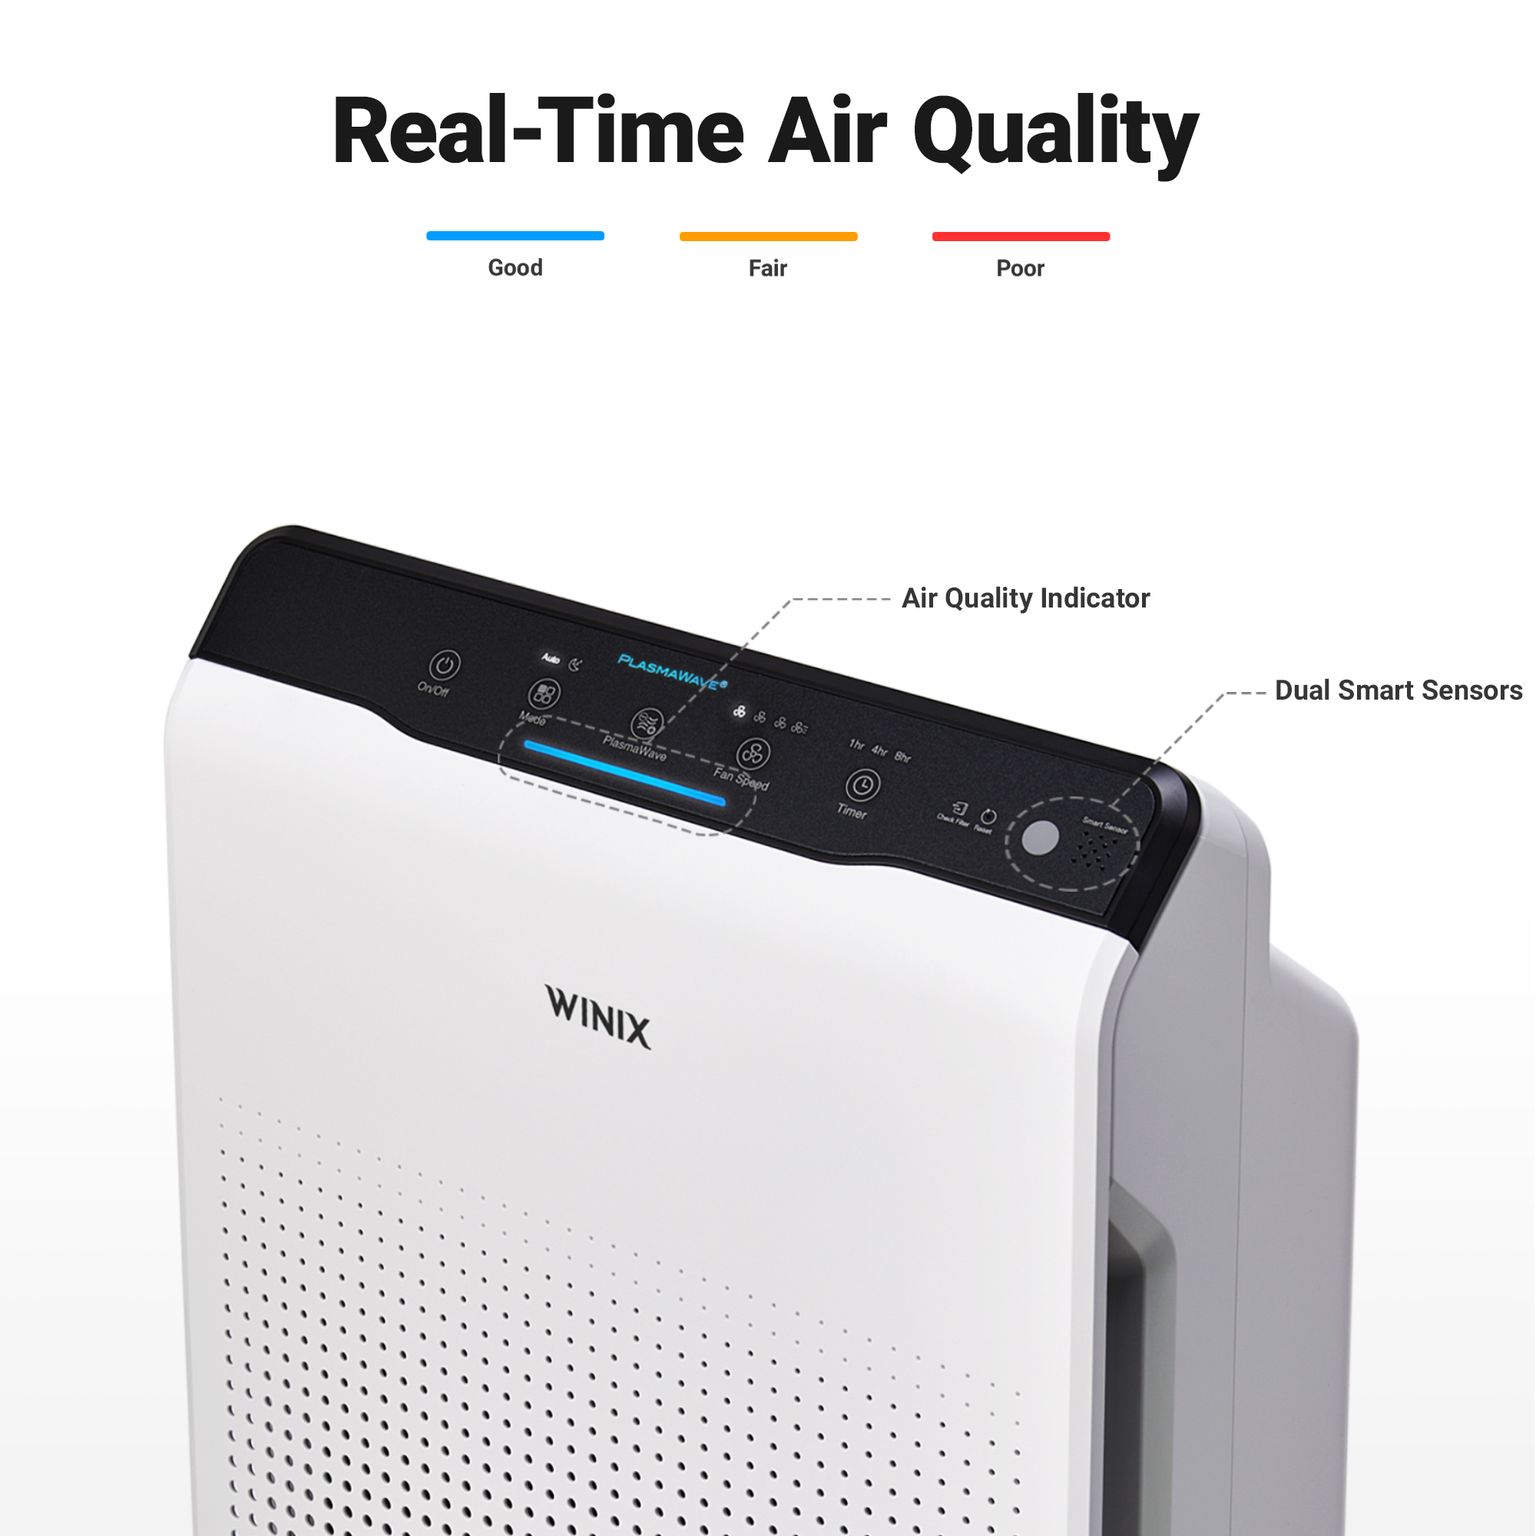 Winix C535 True HEPA 4-Stage Air Purifier for allergens and VOCs with 2 Years of Filters and PlasmaWave Technology AHAM Verified for 360 sq ft and Max Room Capacity 1728 sq ft. - image 6 of 9